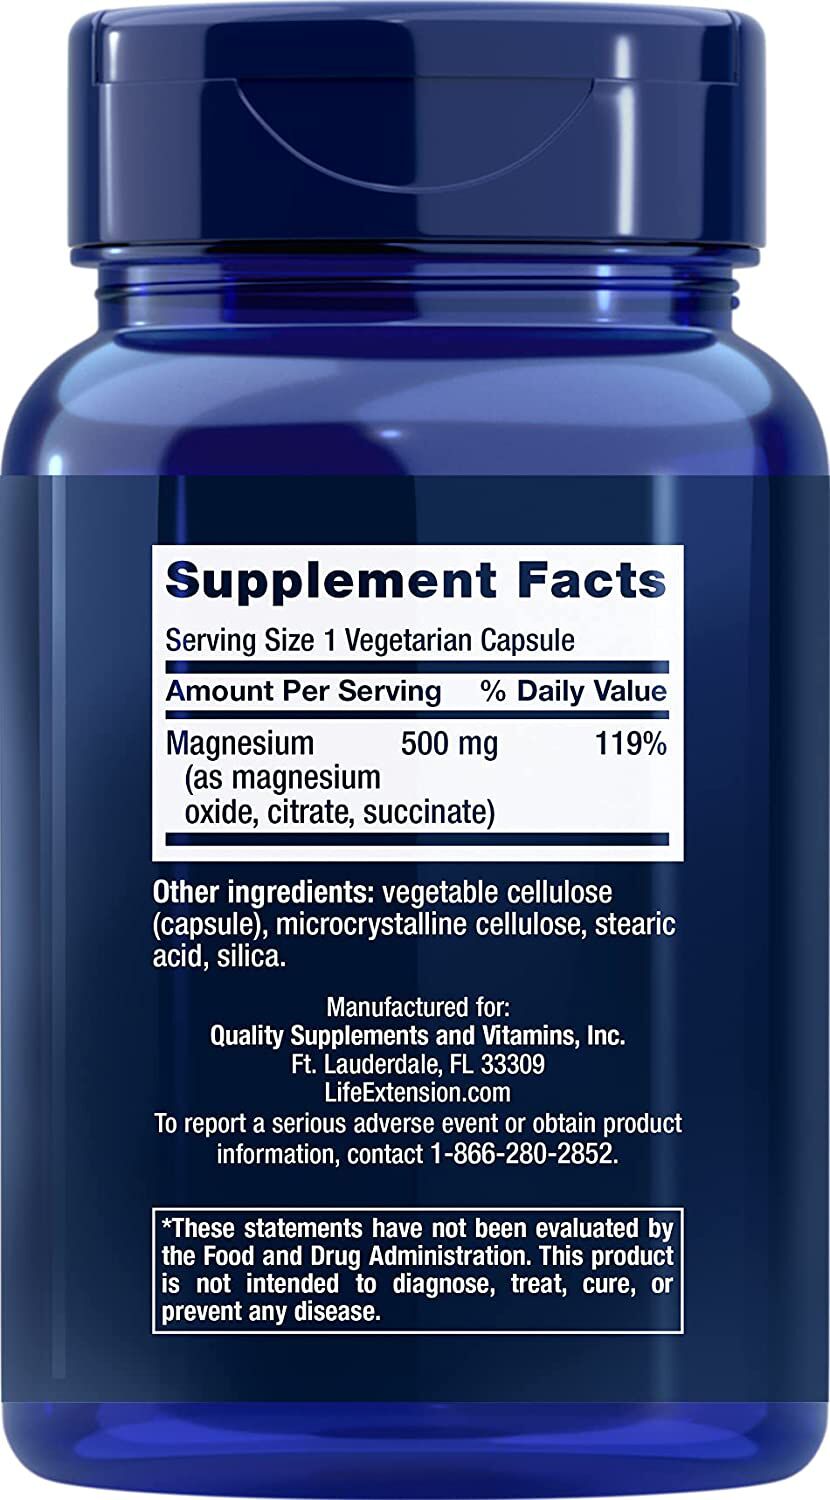 Life Extension Magnesium Caps 100 vegetarian caps - High-quality Minerals by Life Extension at 